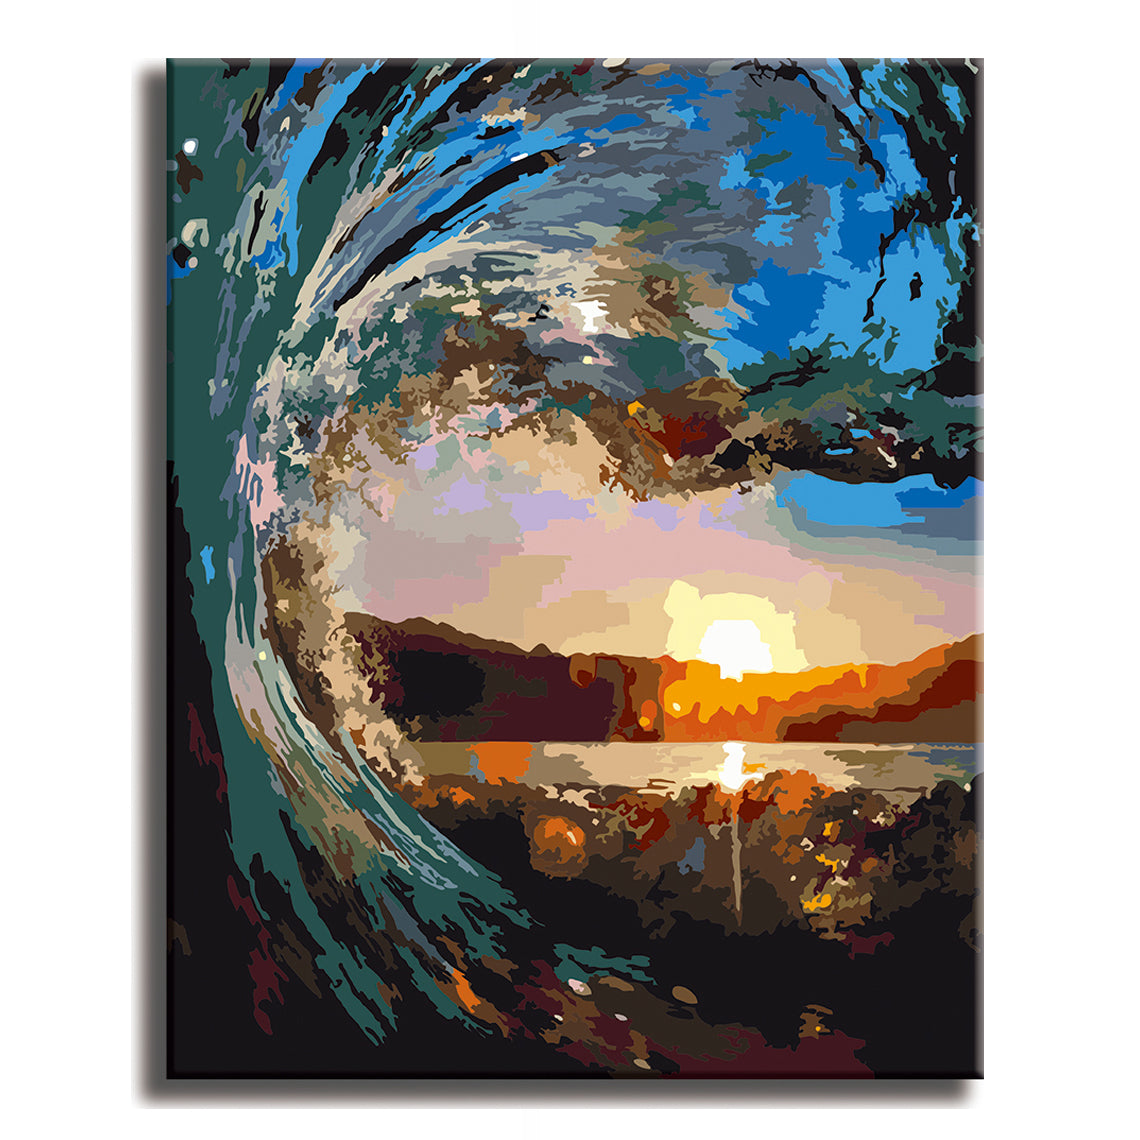 Diy Digital Painting For Beginners, Adult Canvas Reflection Oil